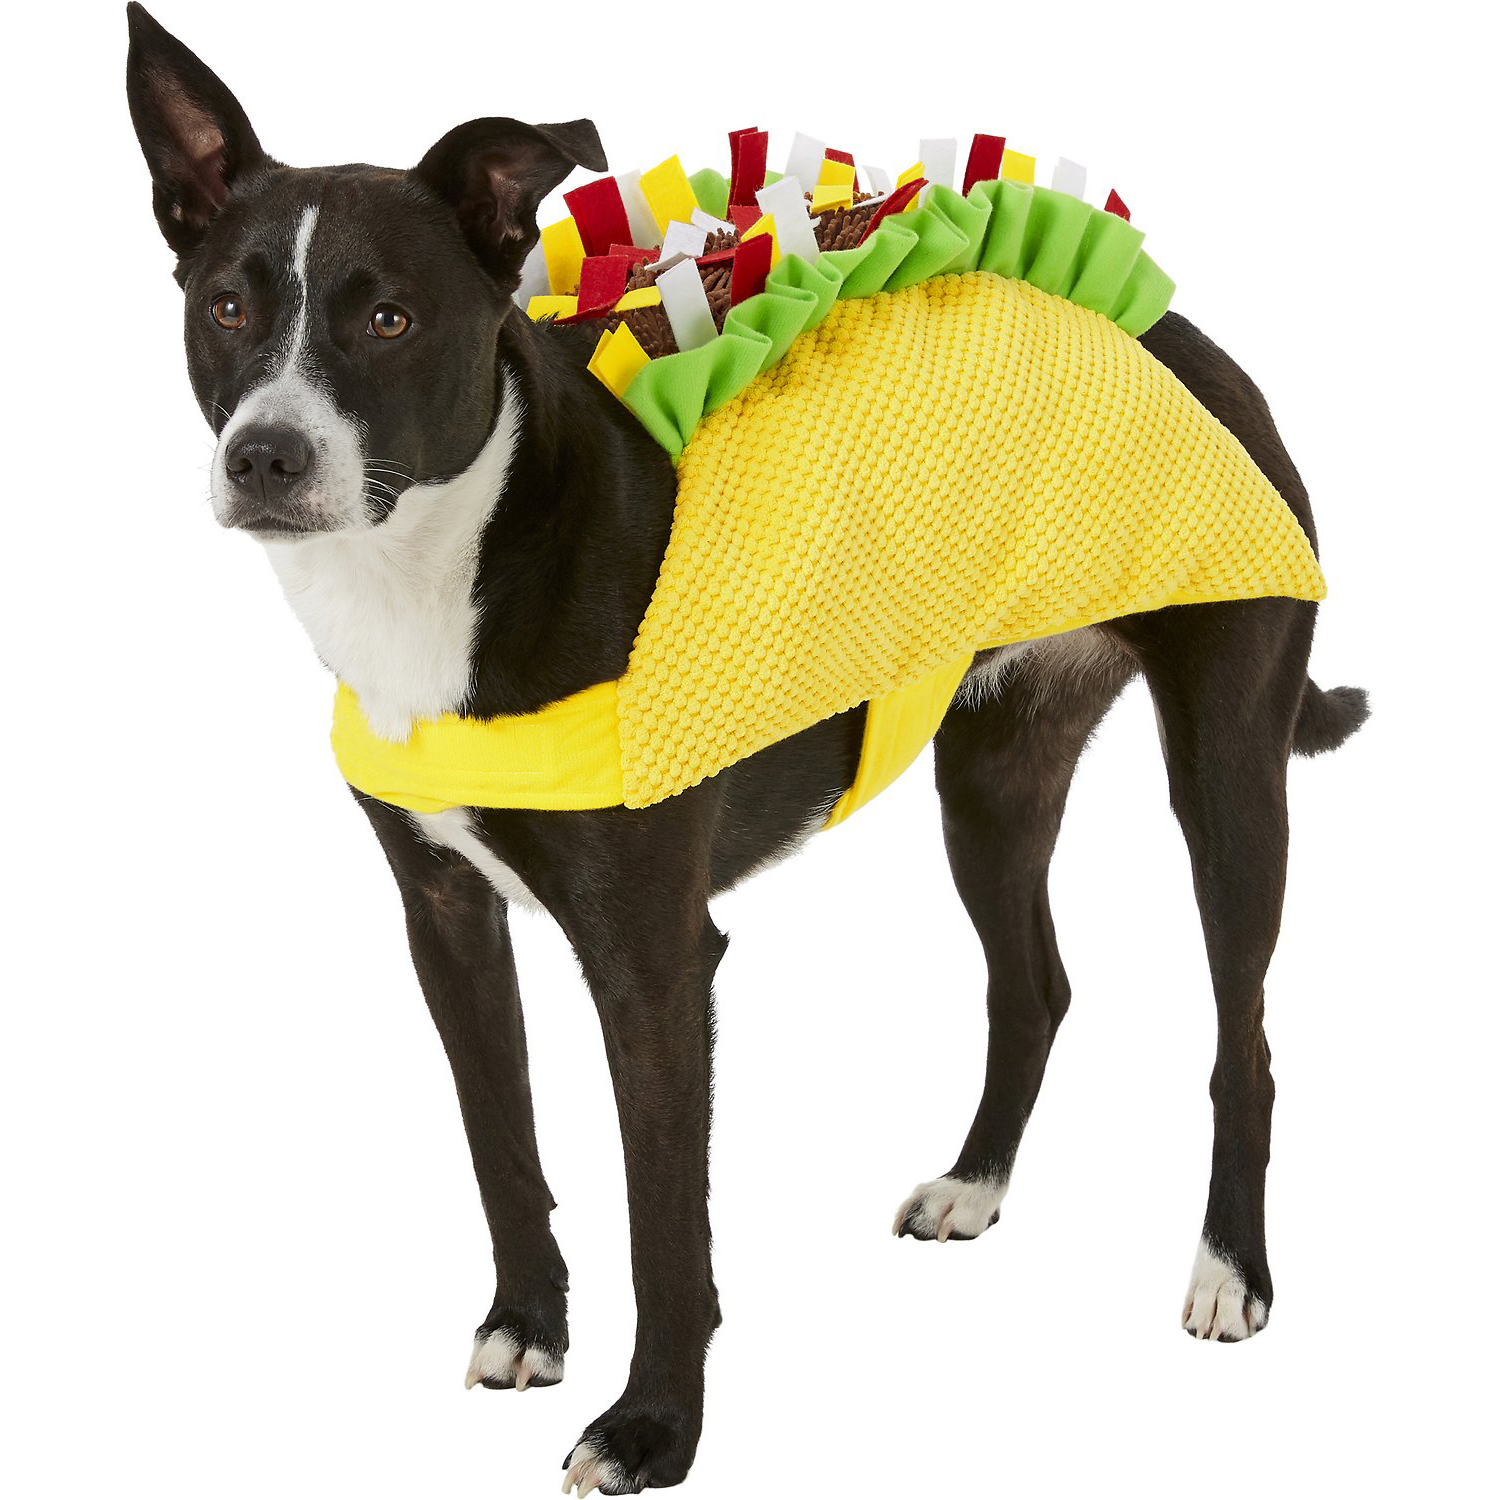 17 Funny + Cute Dog Halloween Costumes We Love for 2021 (+ Picks ...